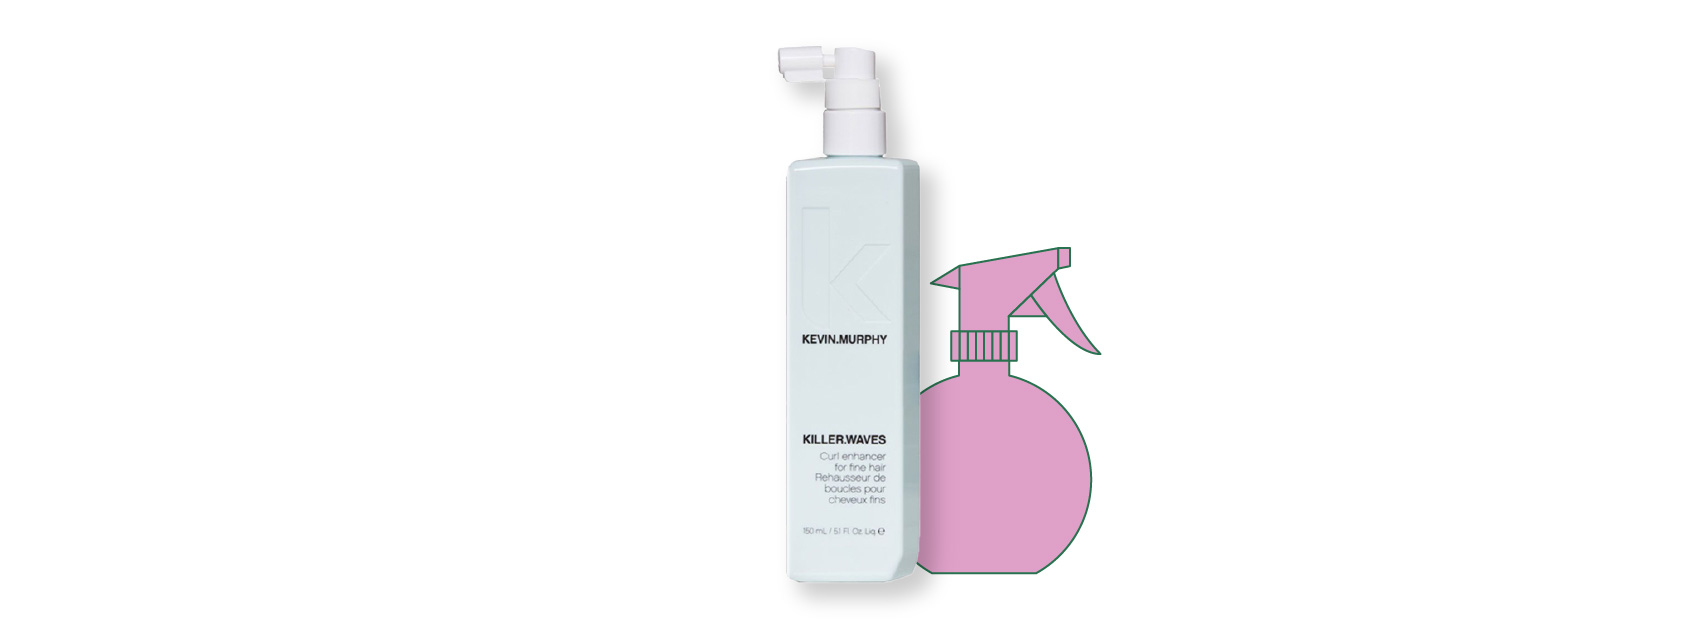 bottle of killer waves by kevin murphy with an illustration of a spray bottle